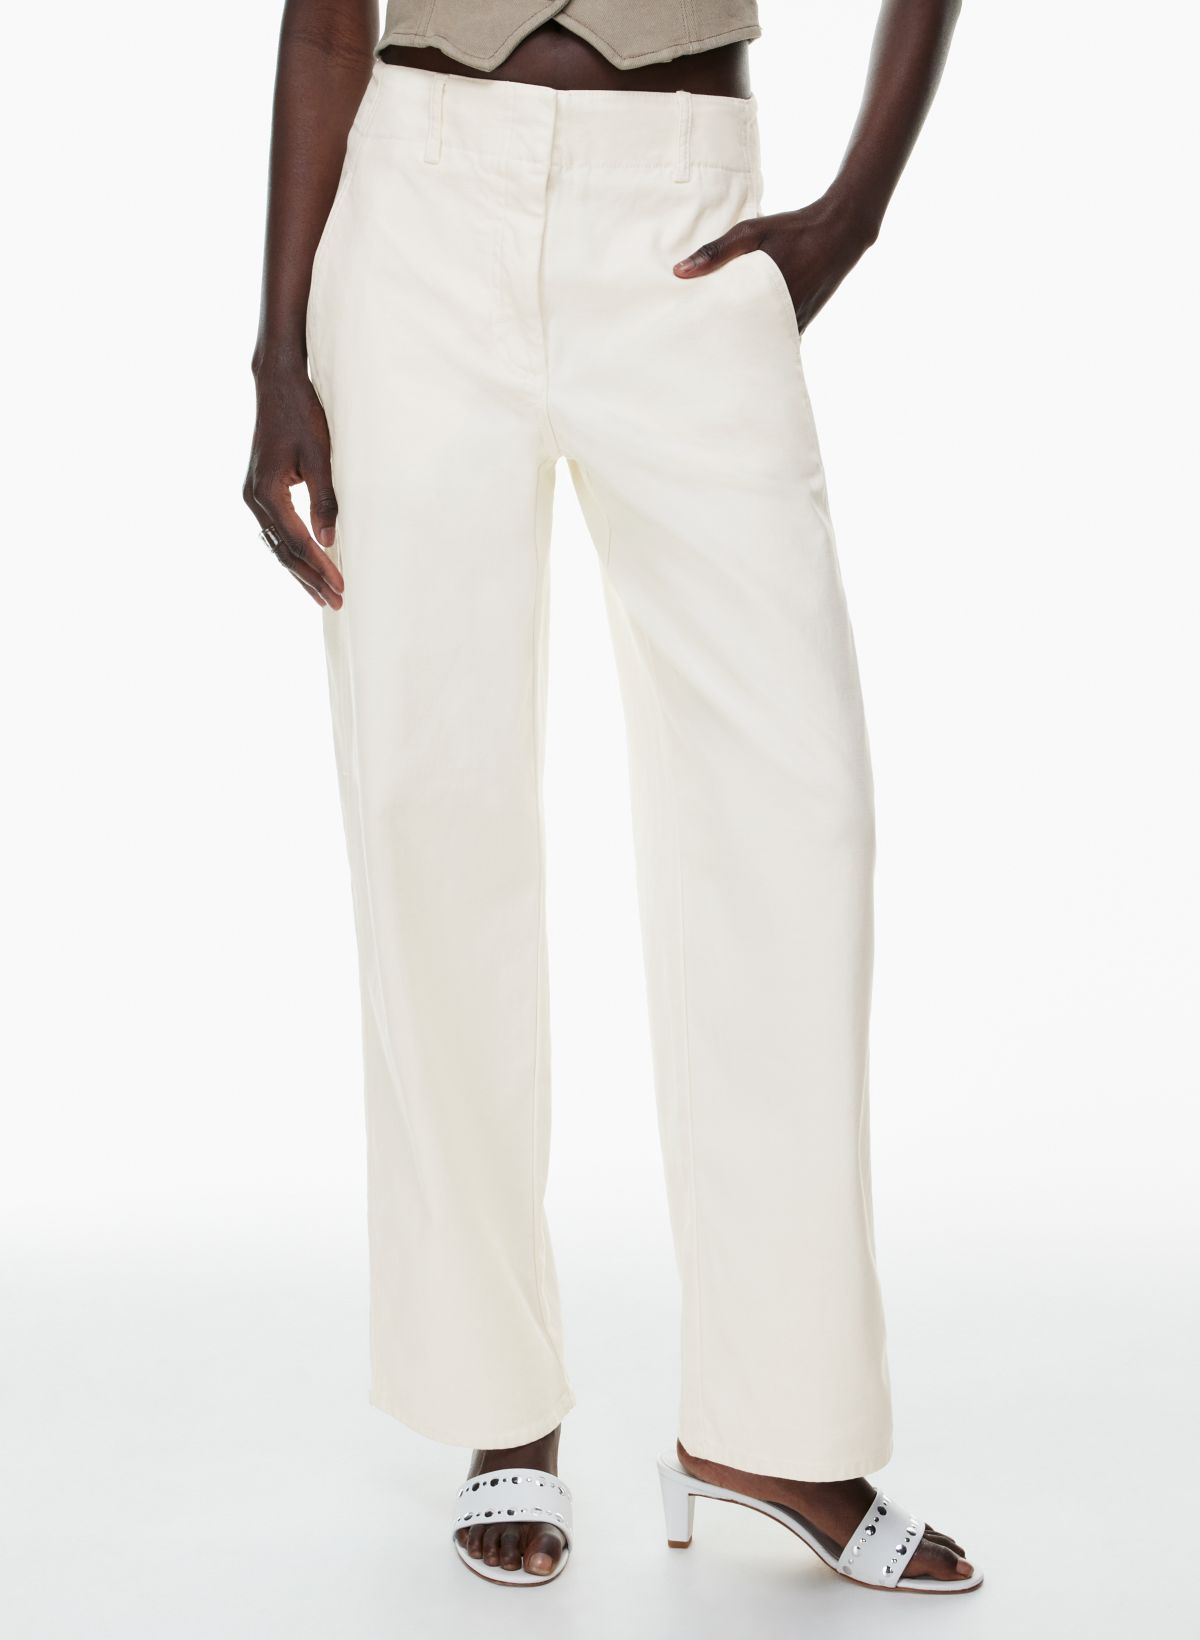 White High Waisted Pleated Pants – Livin' on Dreams Boutique